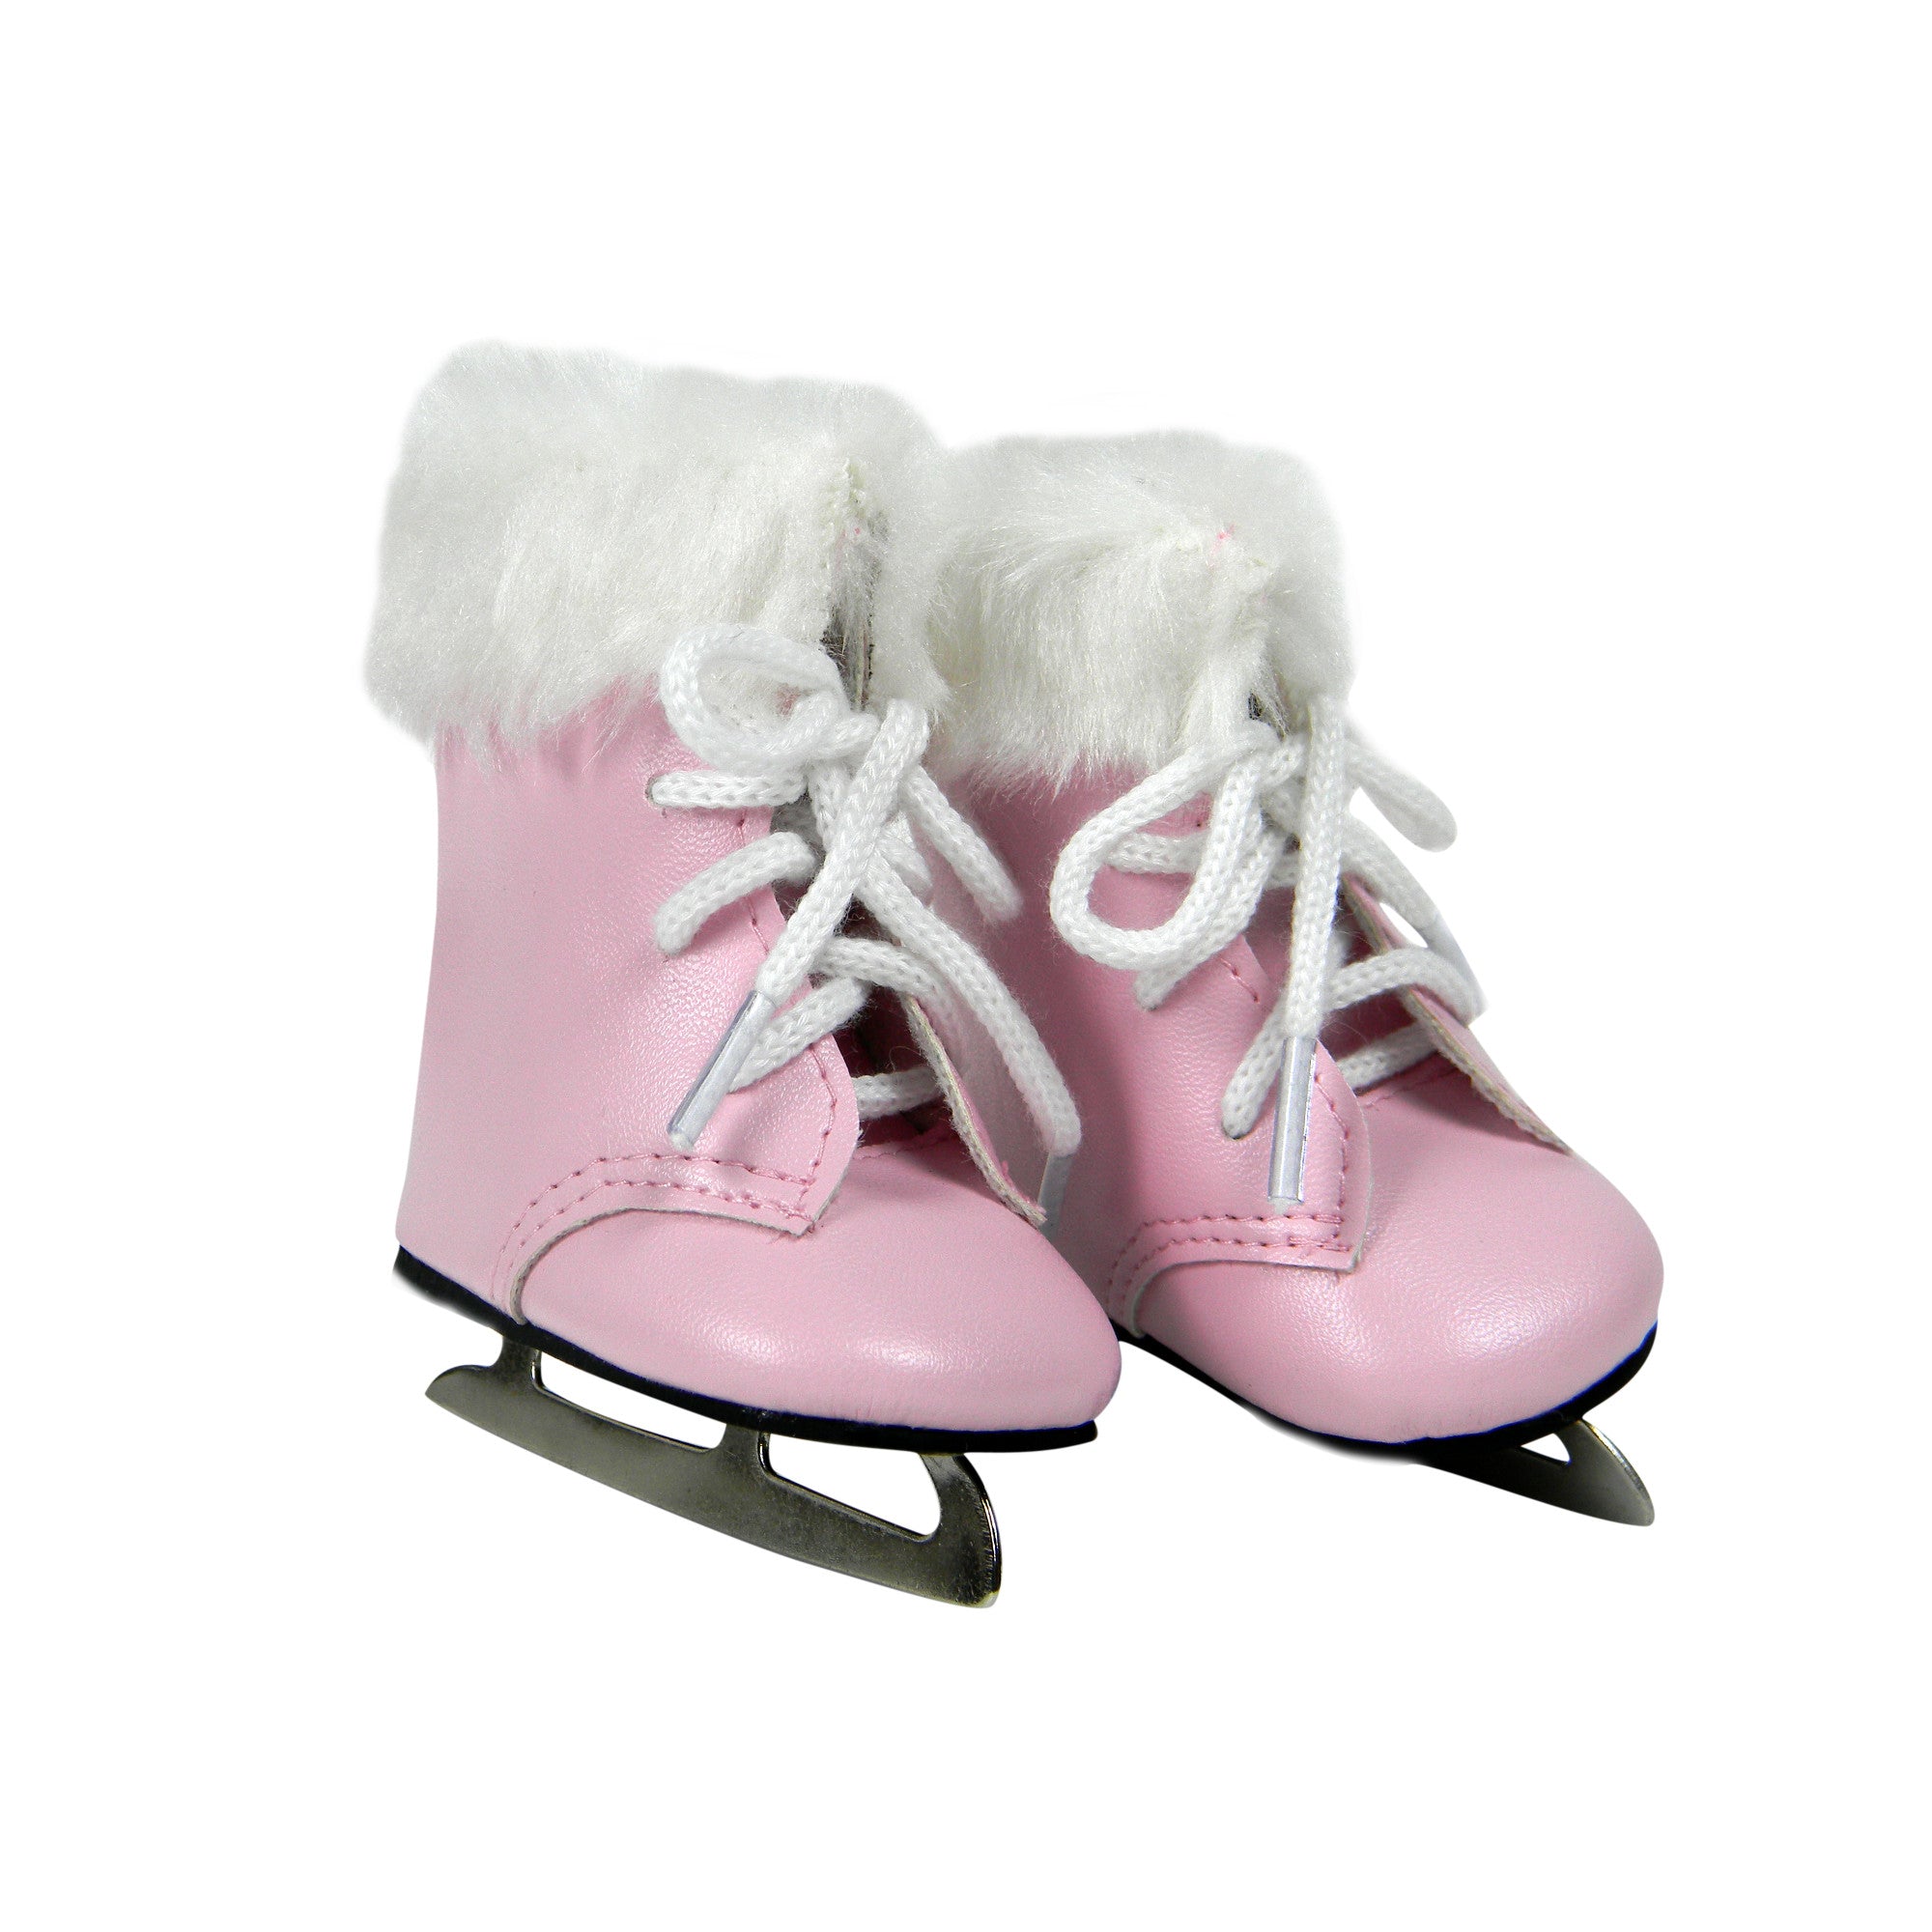 Sophia’s Realistic Gender-Neutral Lace-Up Ice Skates with White Fur Trim for 18” Dolls, Pink